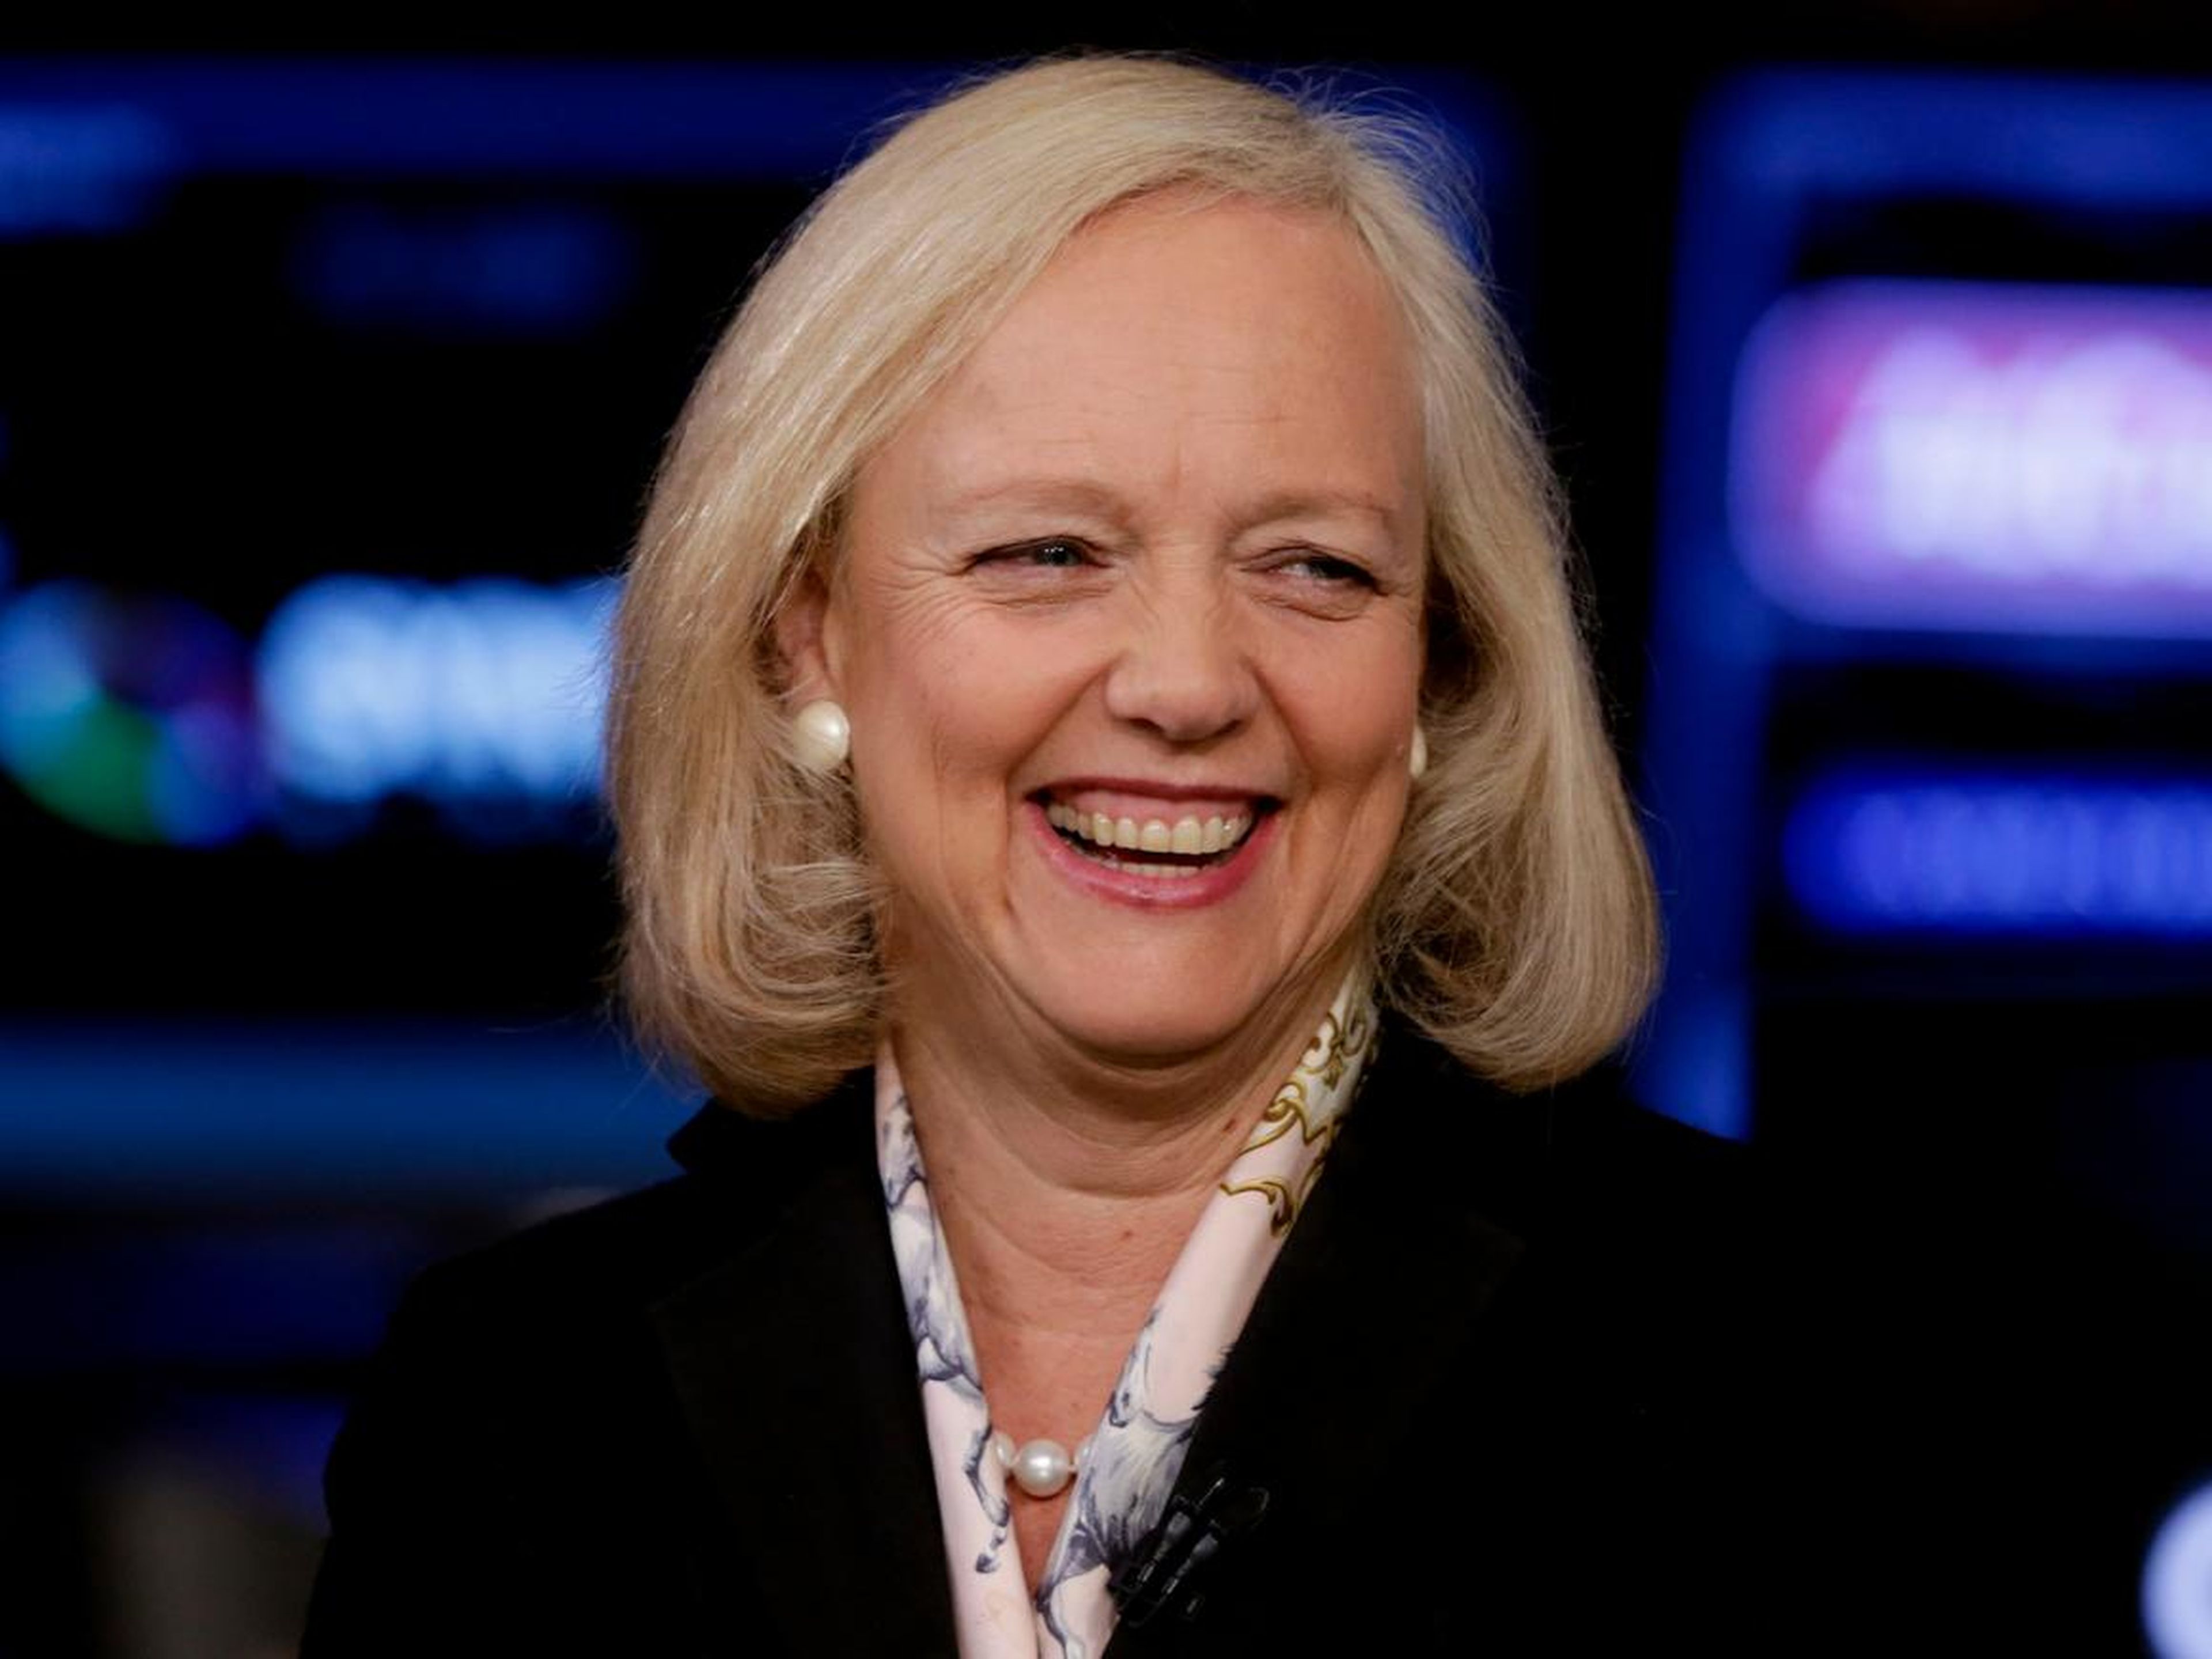 "When a small business grows like eBay did, it has a multiplier effect. It creates other small businesses that supply it with intellectual capital, goods, and services." — Meg Whitman, former CEO of Hewlett Packard Enterprise